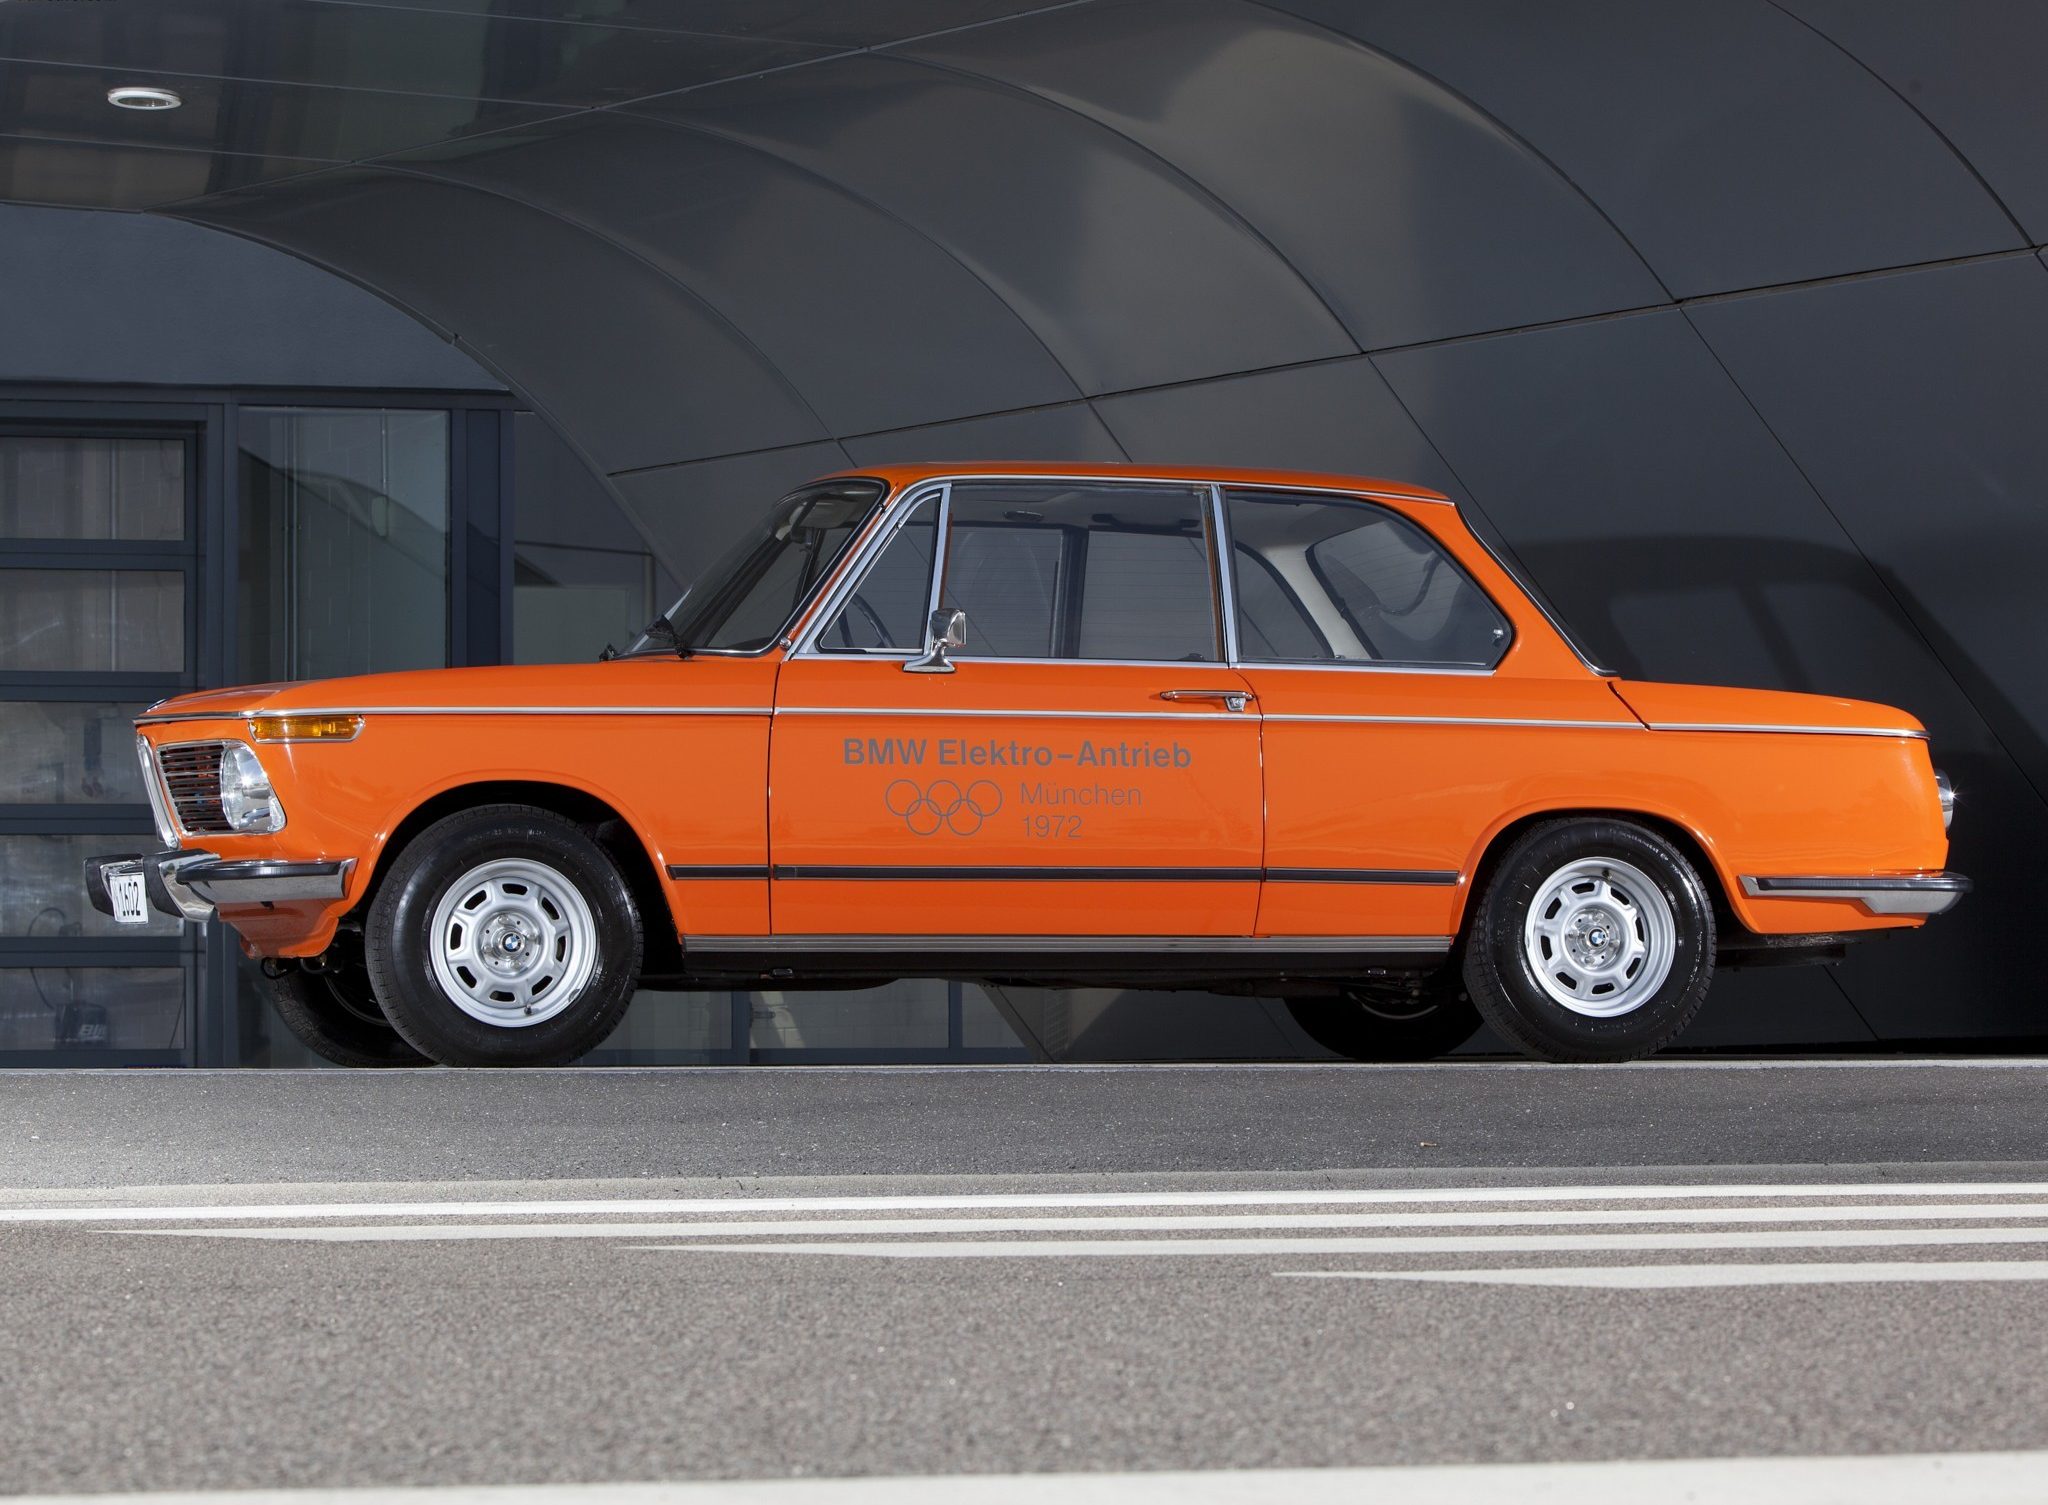 1966 BMW 02 Series Wallpapers | SuperCars.net